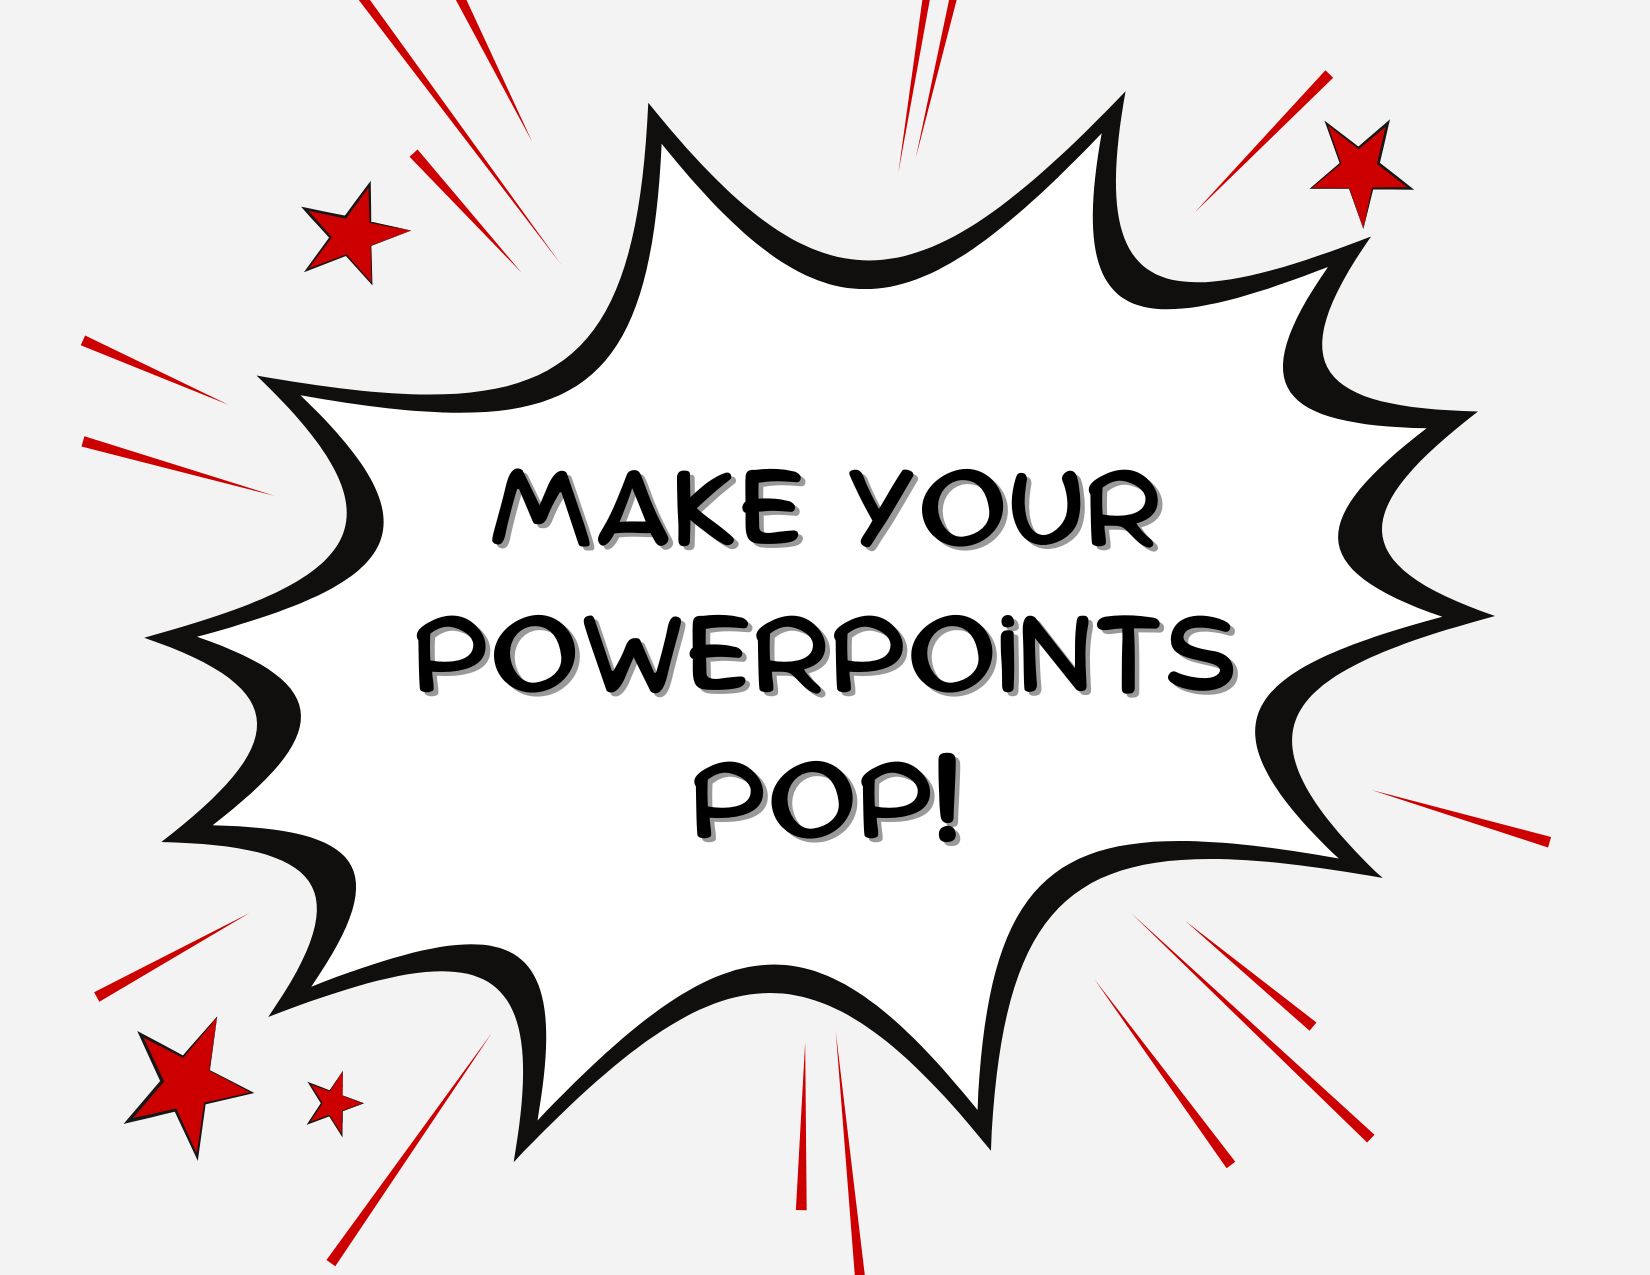 Comic book style graphic with red stars and movement lines. Text reads: Make your Powerpoints pop!